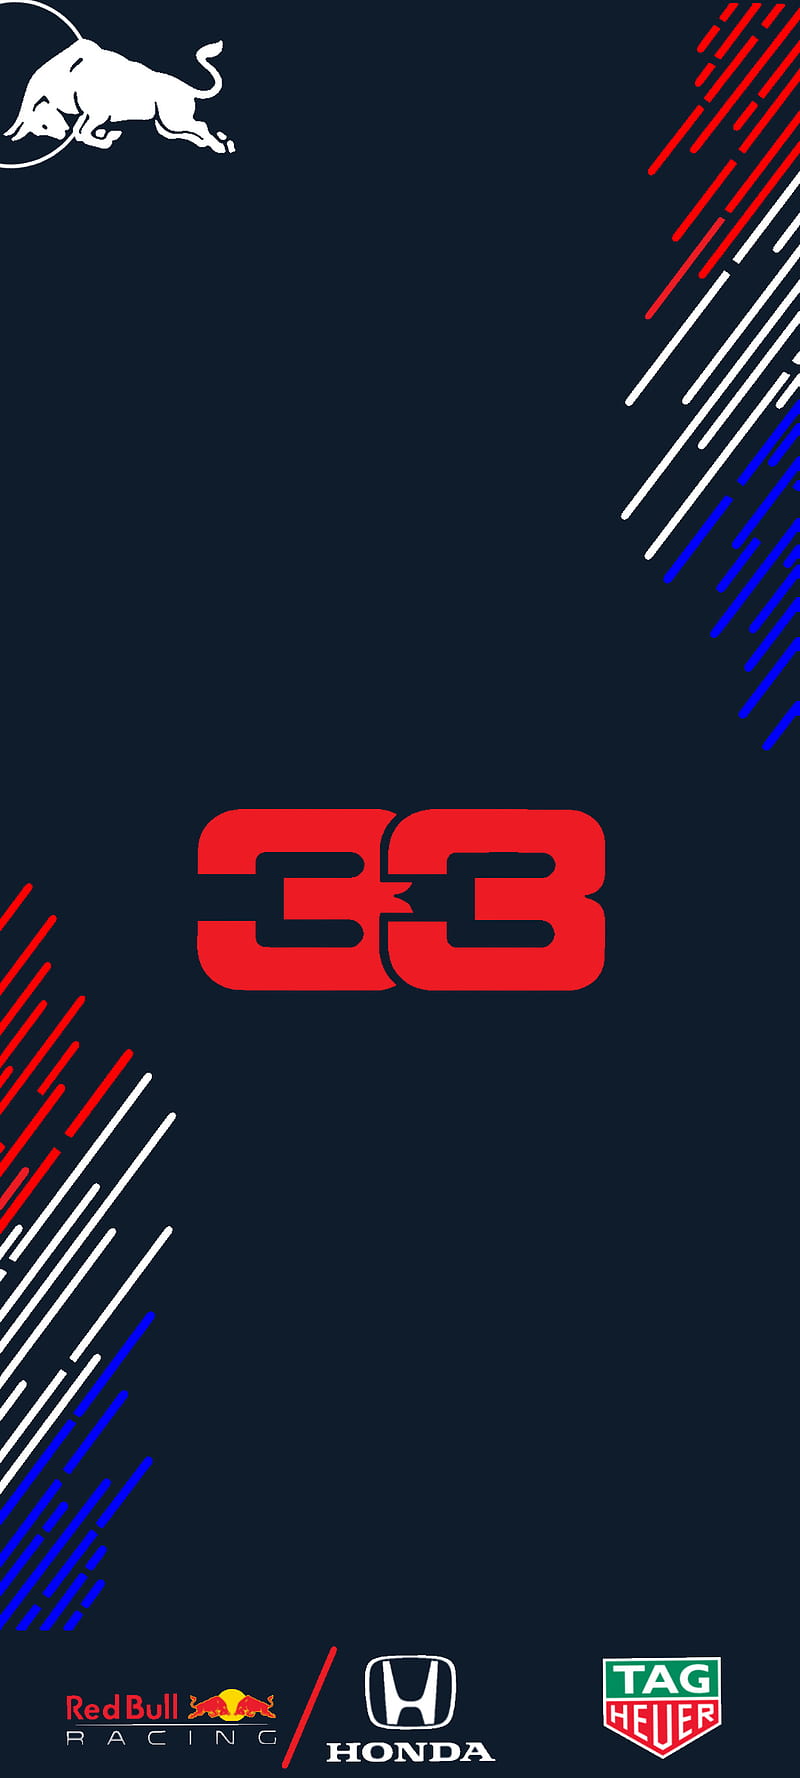 Redbull Max 33 V2 Abstract Android Black Edge F1 Iphone Red Verstappen Hd Mobile Wallpaper Peakpx